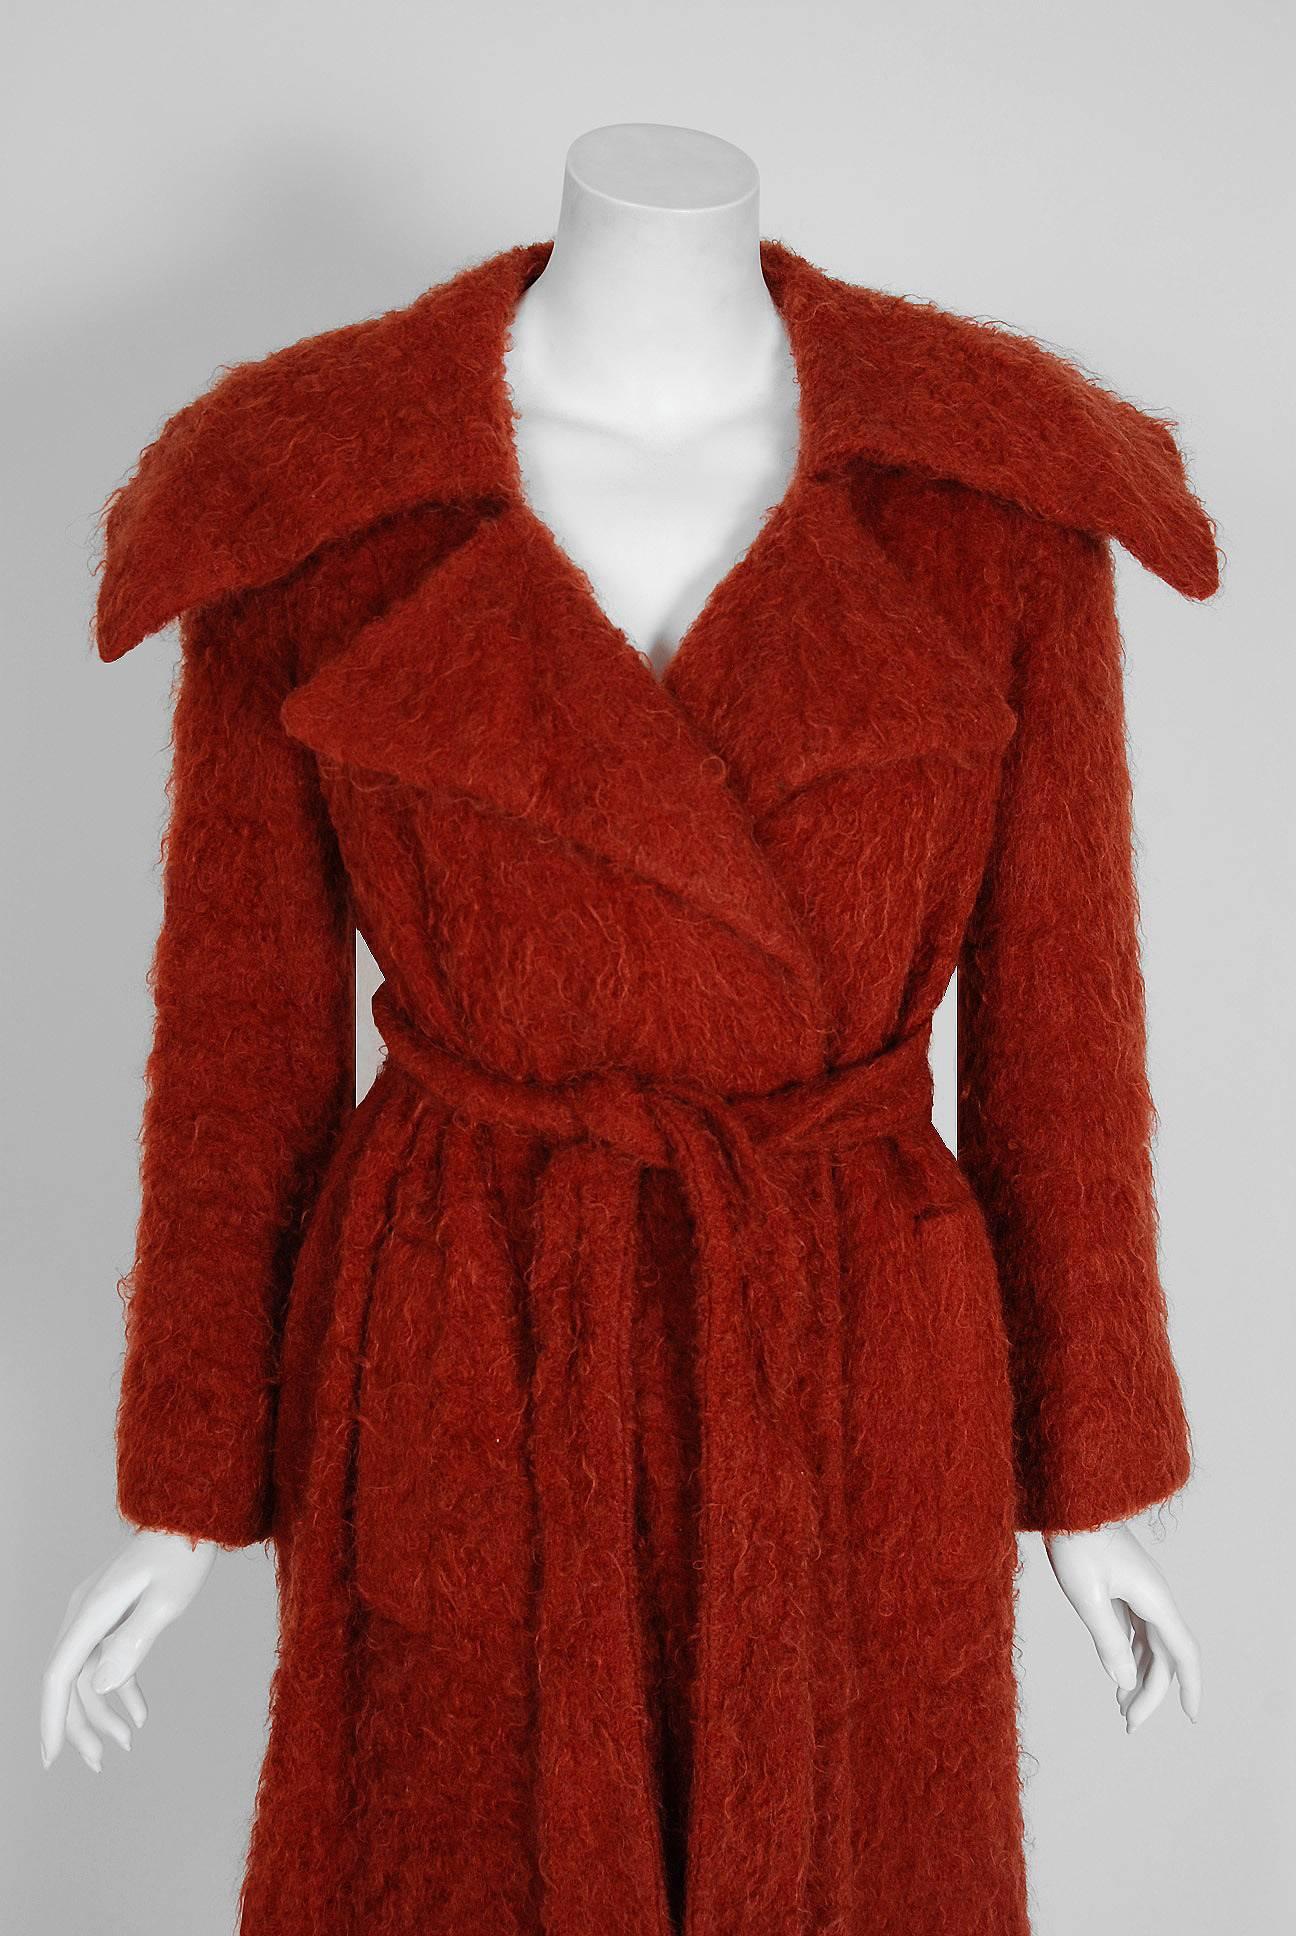 Exquisite 1970's orange-red rust mohair wool coat by the famous 